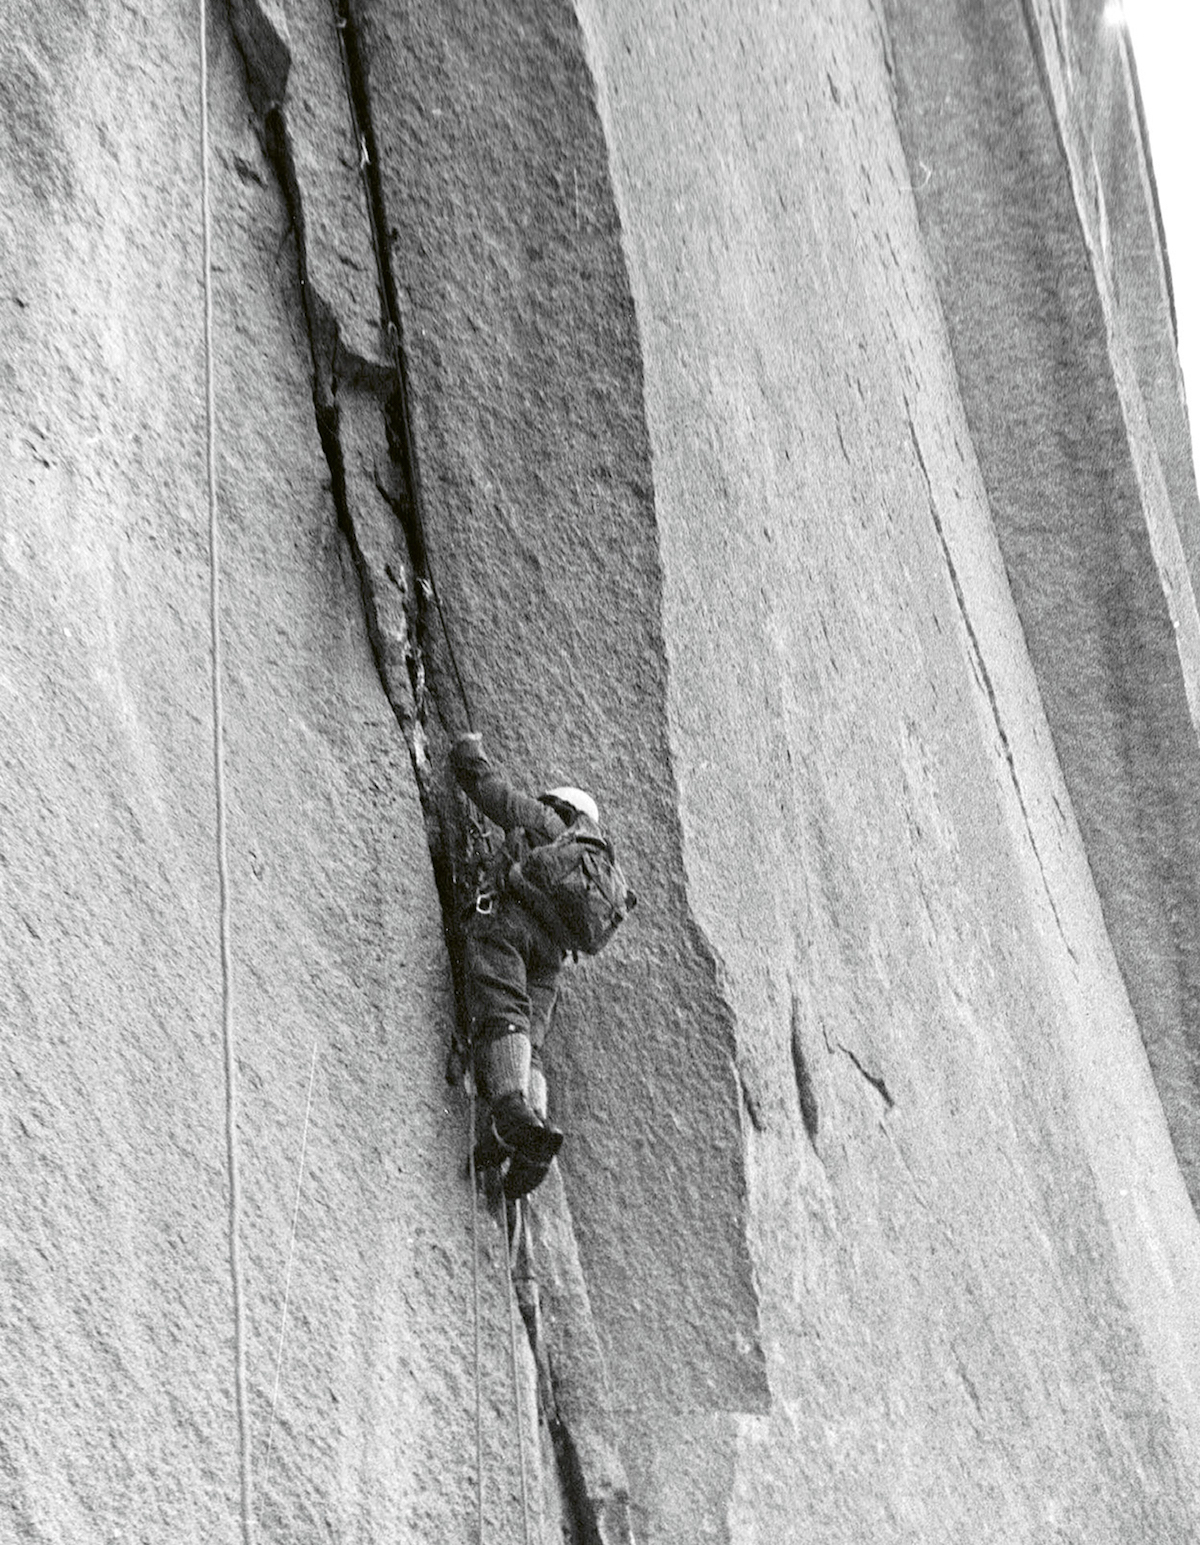 Auger on the 1966 first ascent of University Wall in Squamish. [Photo] Tim Auger collection